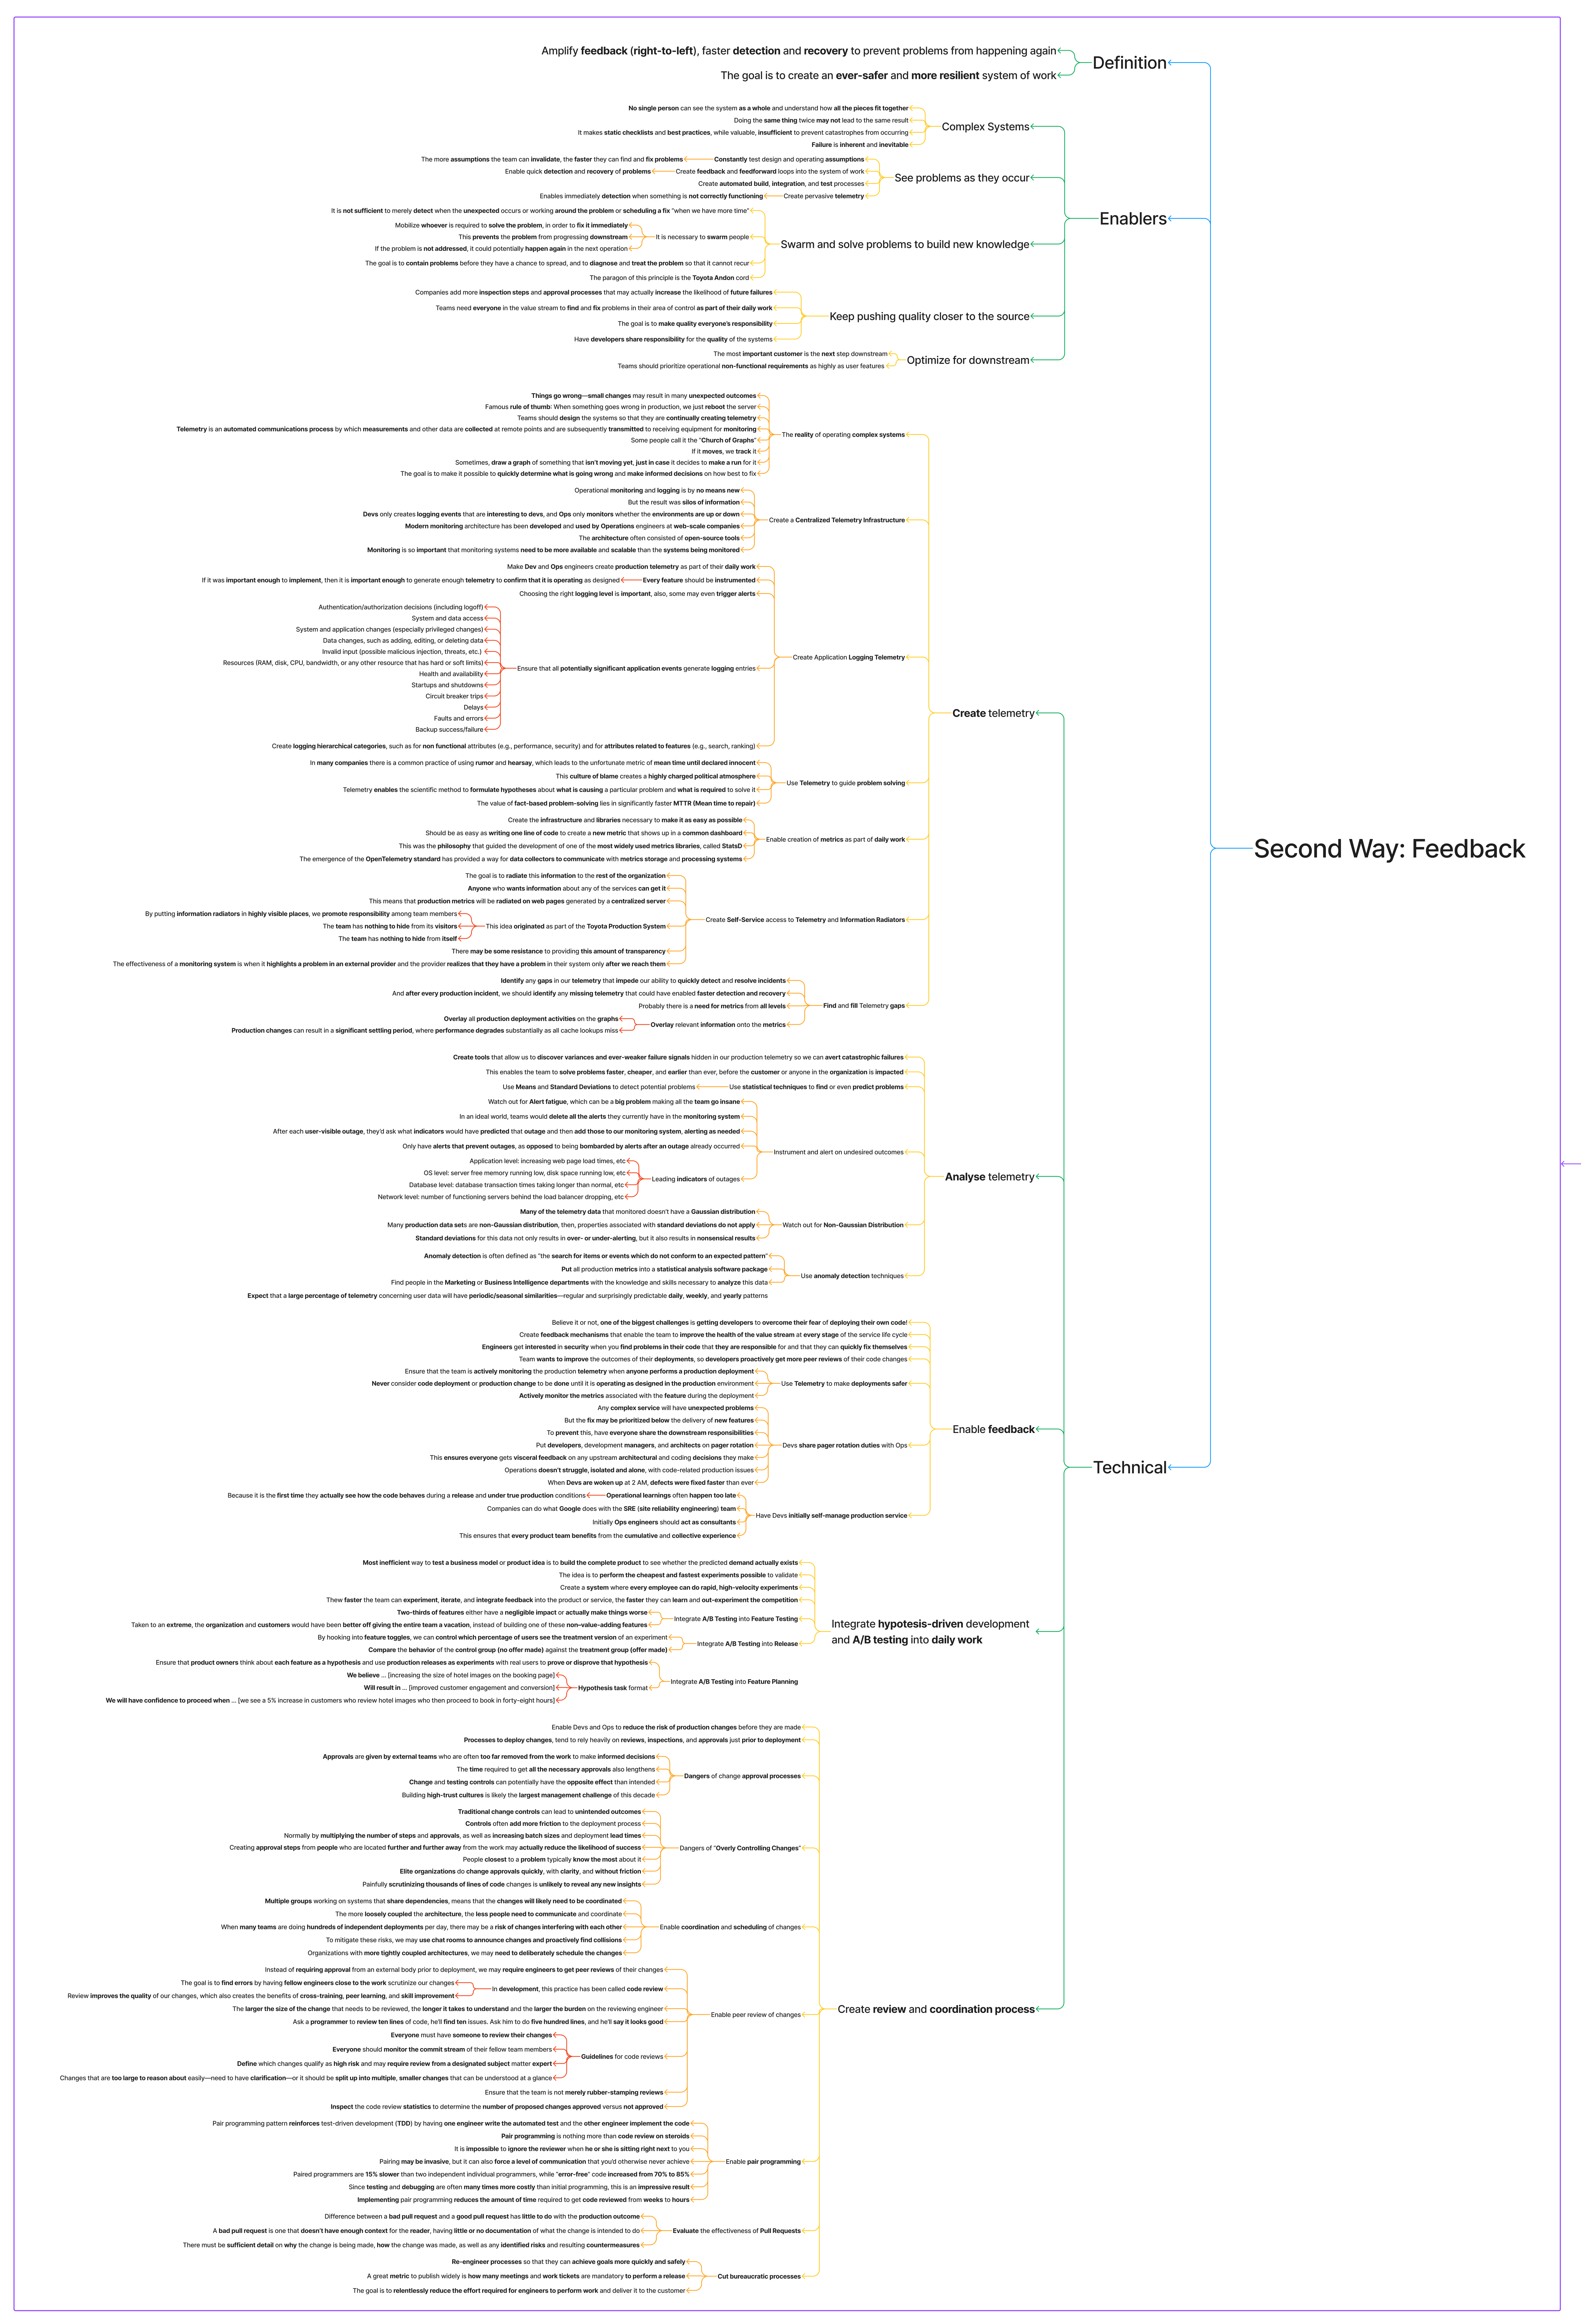 Mind Map - Second Way